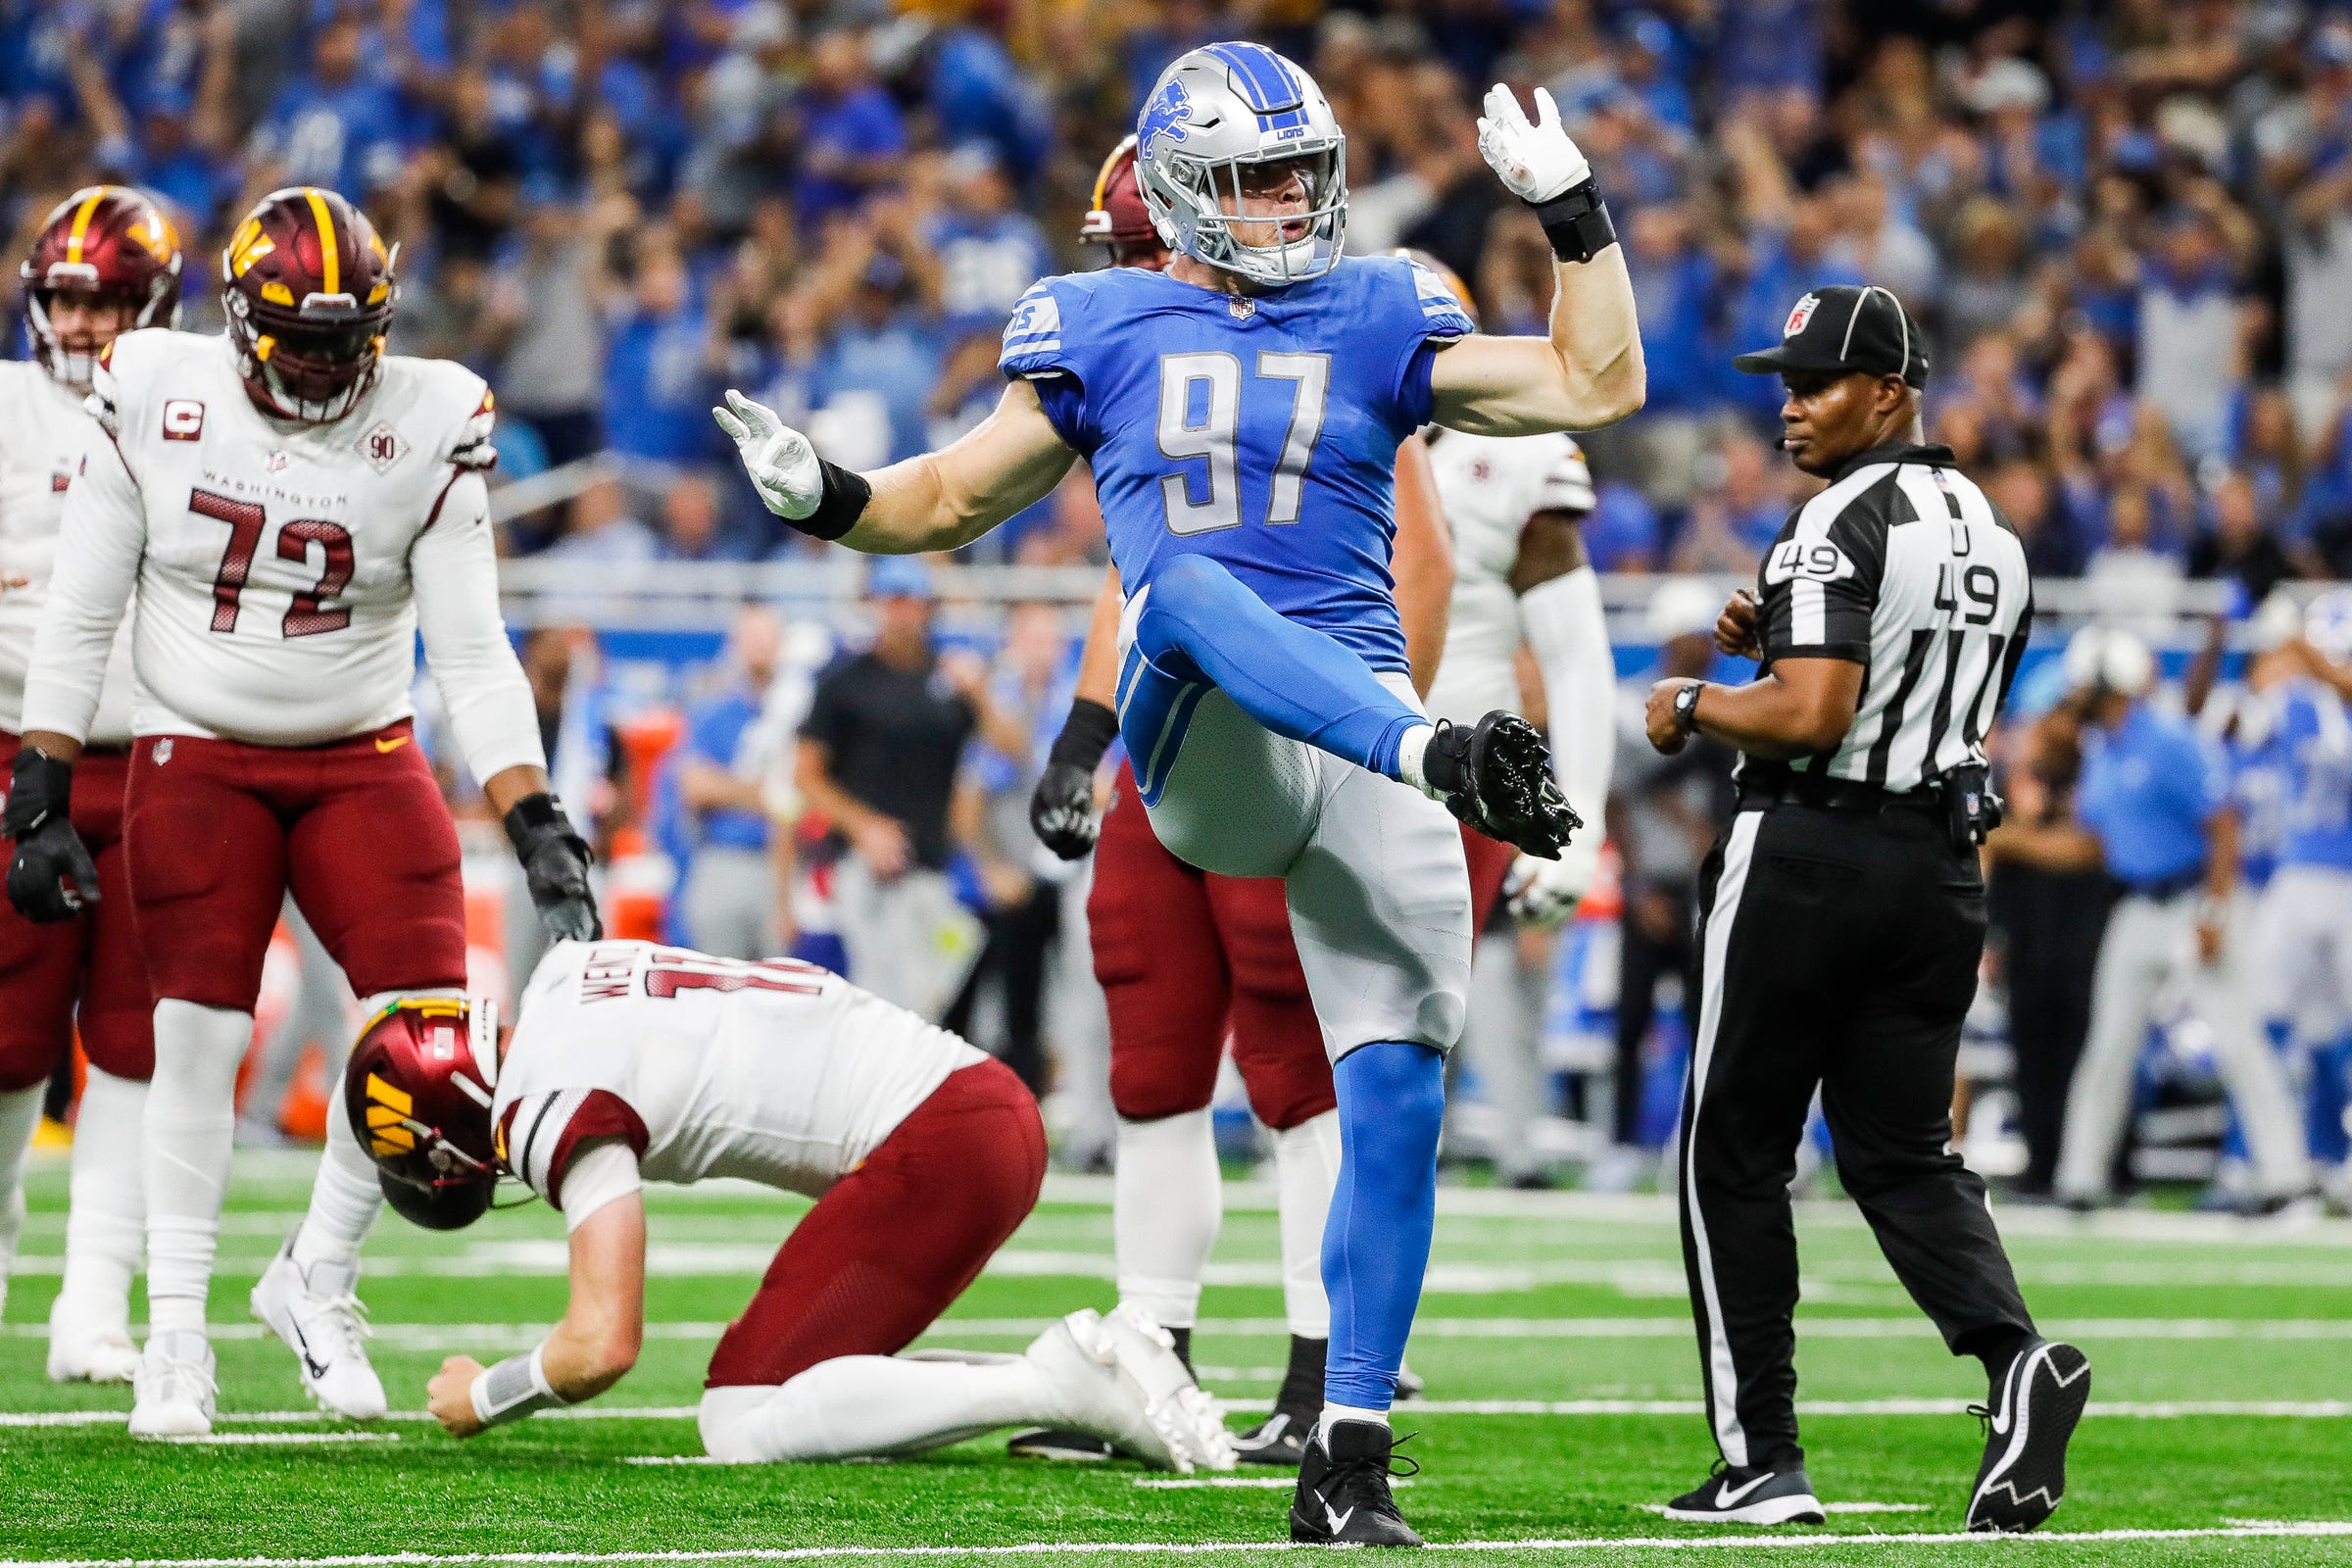 Aidan Hutchinson may be part of Detroit Lions' D-line heritage